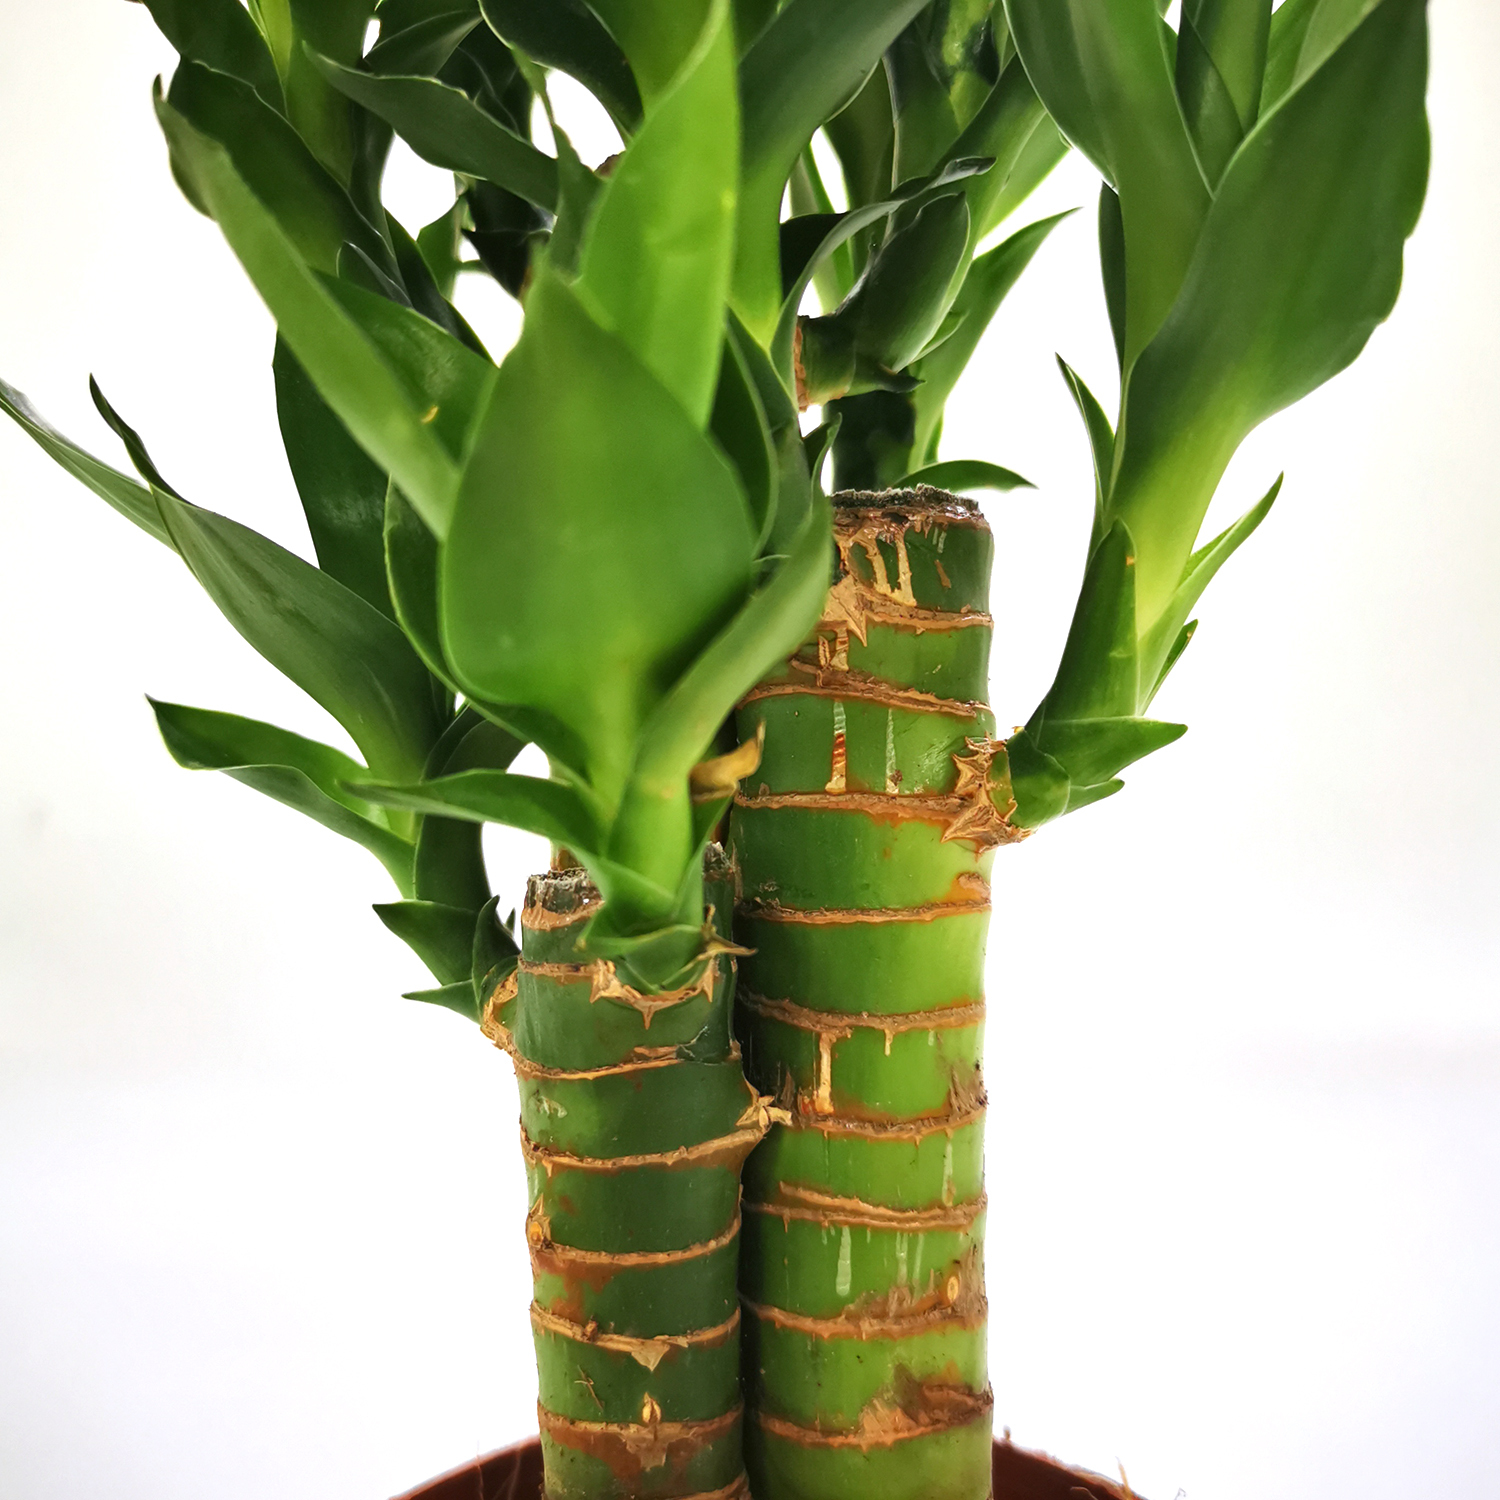  3 in 1 Lotus Bamboo Wholesale Lucky Bamboo Bonsai Live Plants Nursery Wholesale  